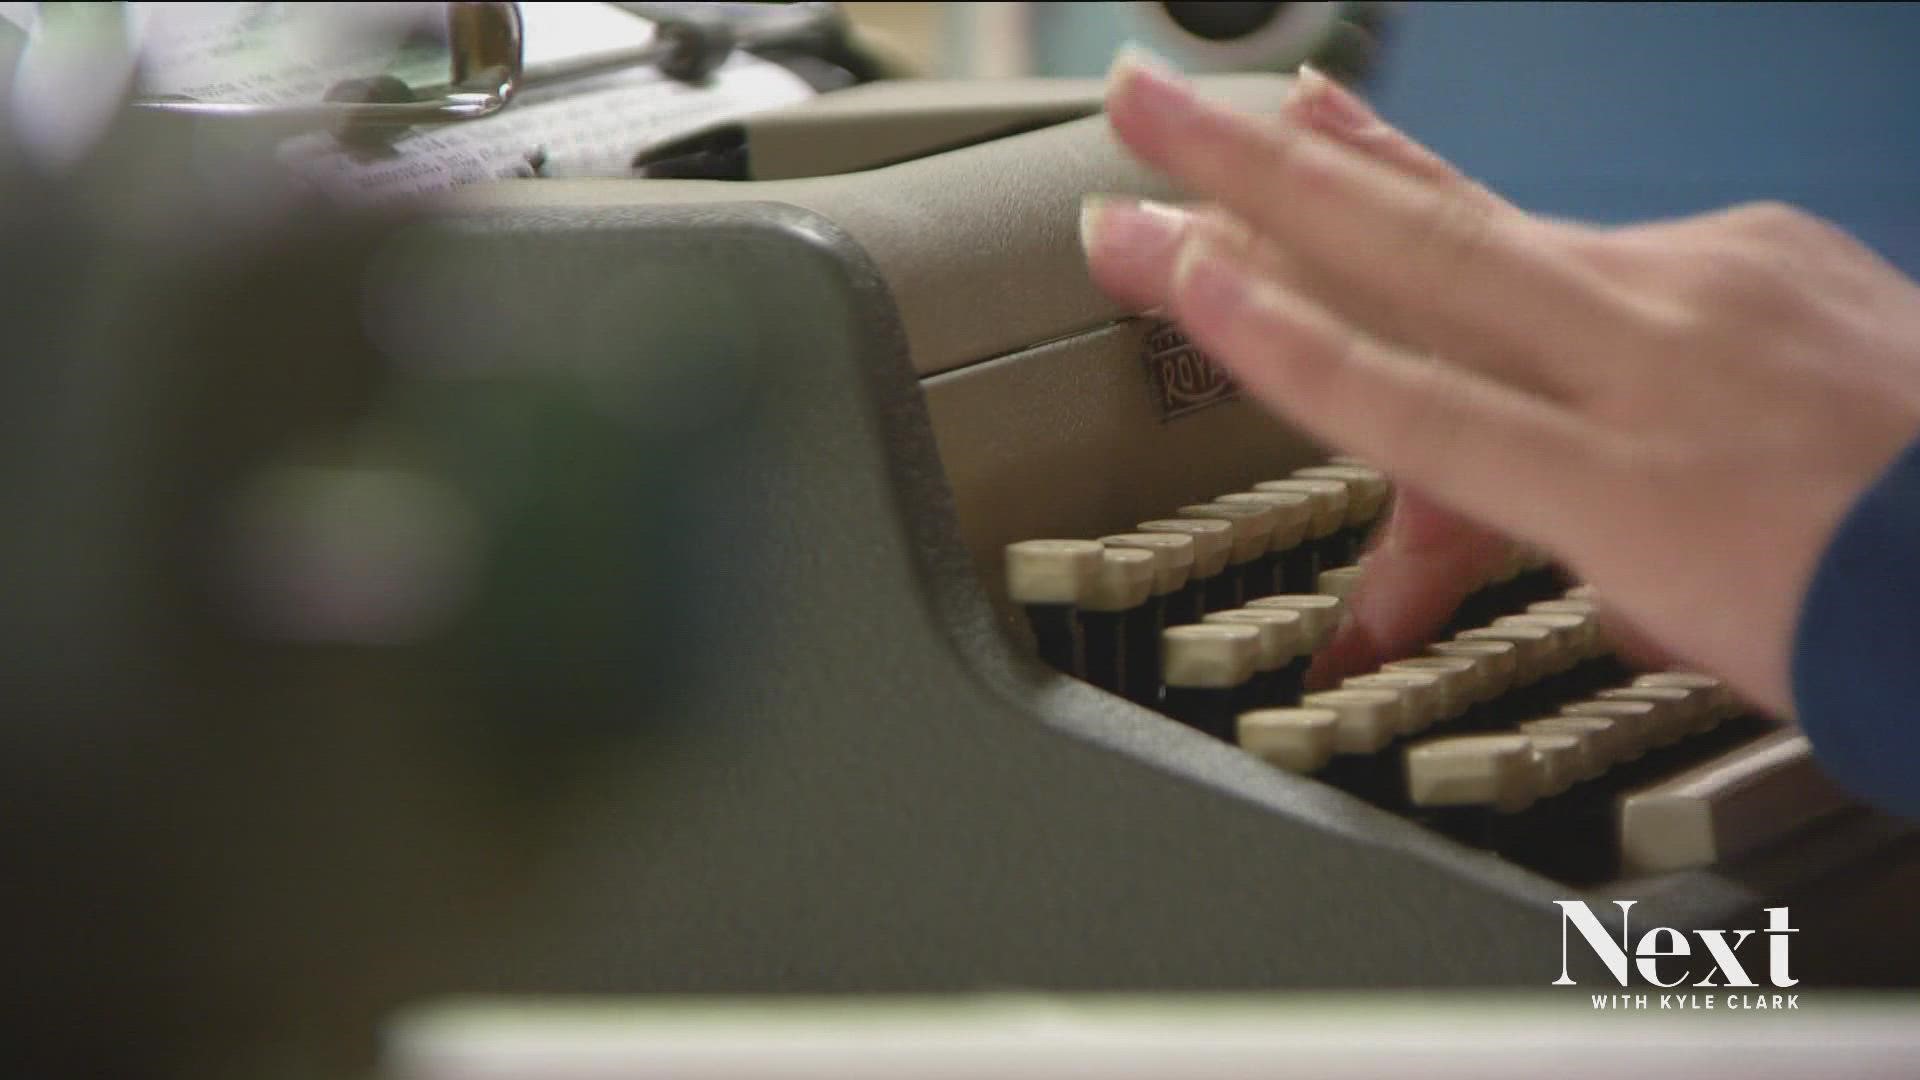 A Longmont teacher that uses typewriters as part of the curriculum got a special gift from enthusiast Tom Hanks after sending him a letter.